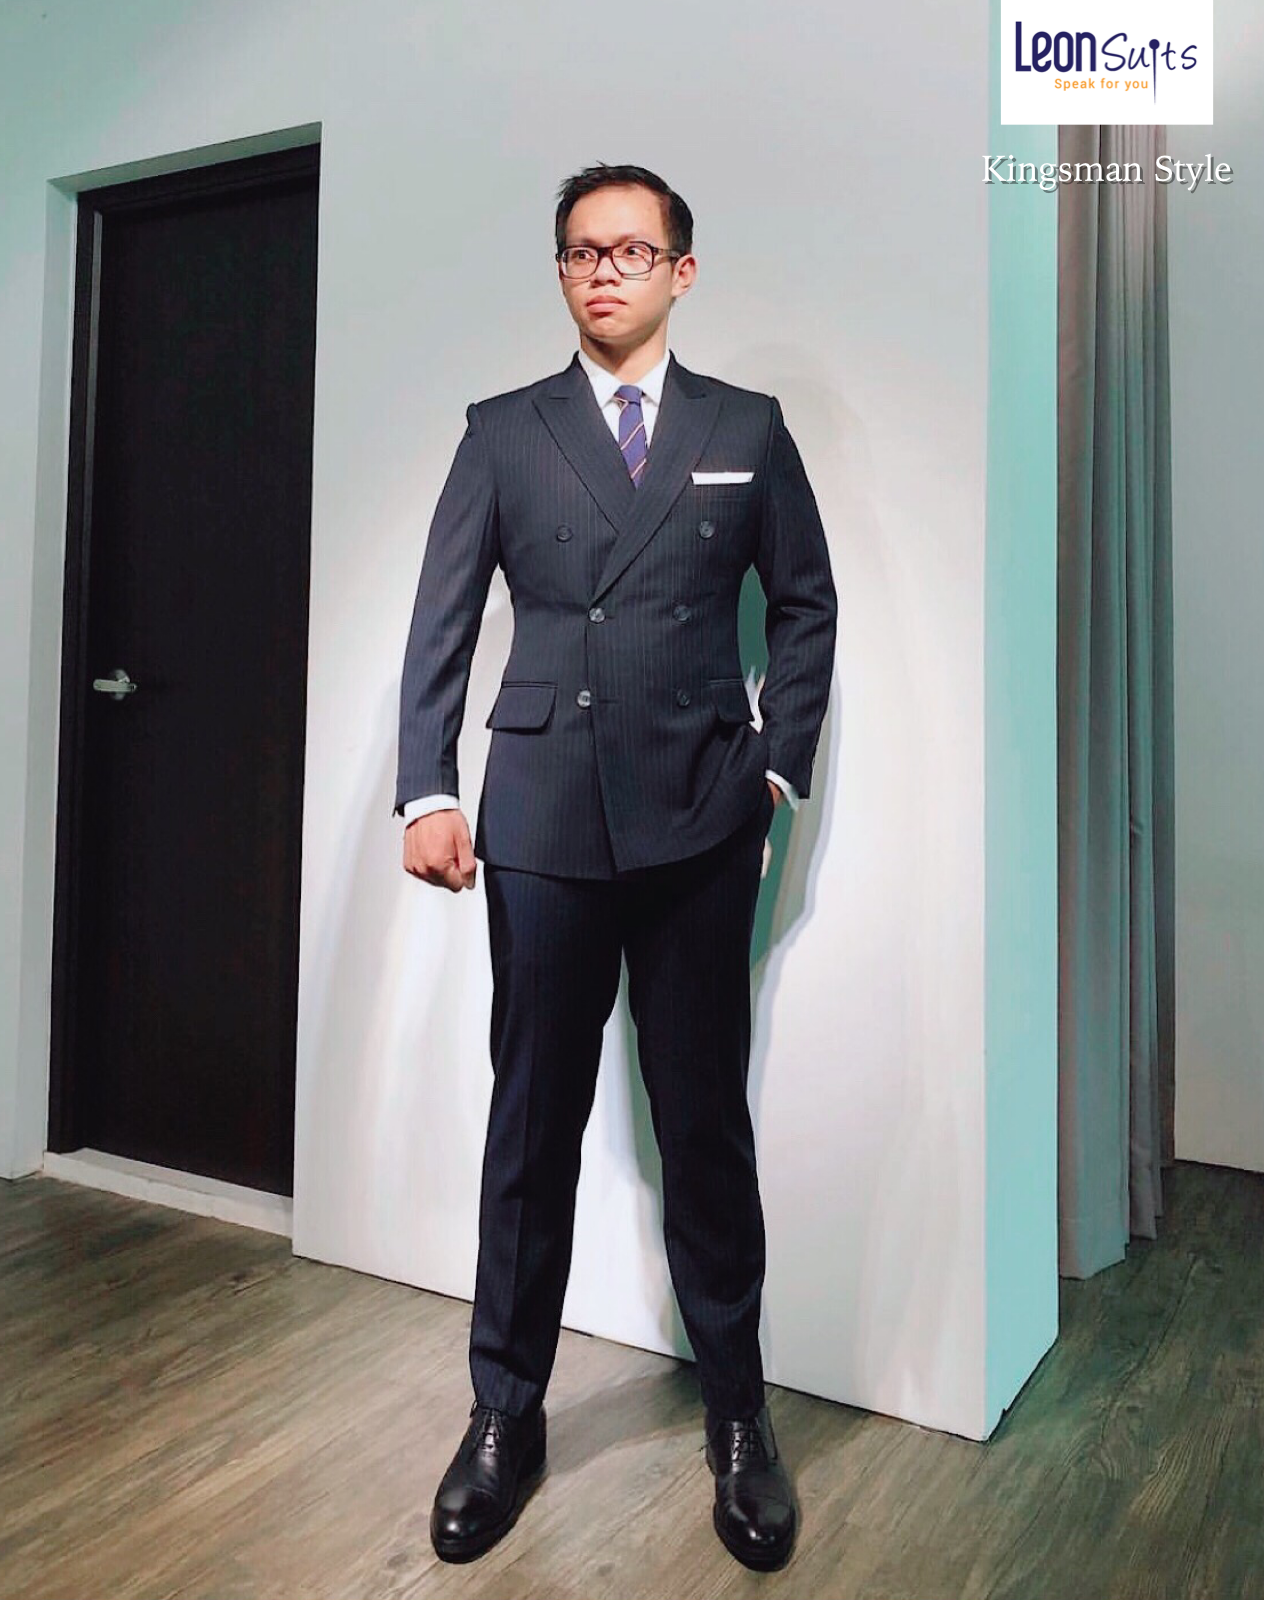 Custom Made ‘Kingsman’ Double-breasted Suit